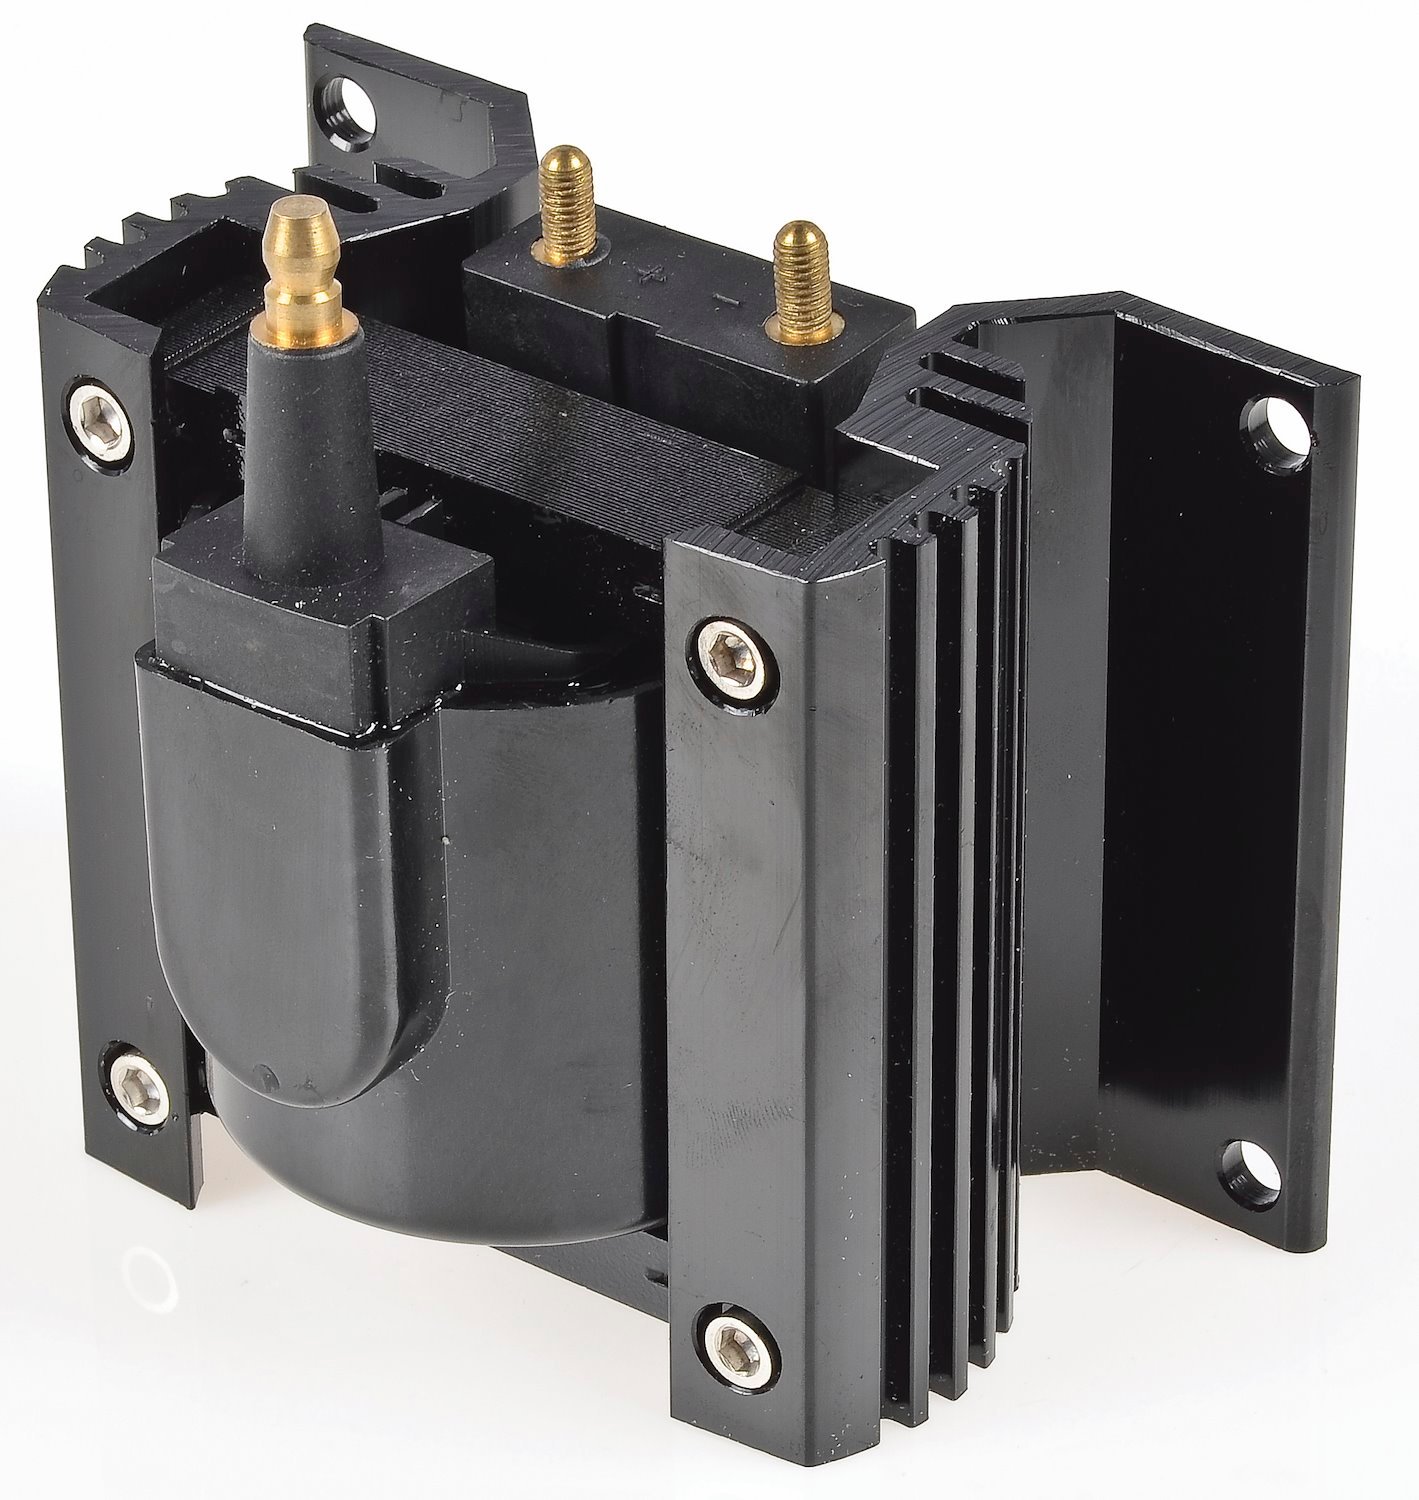 High-Output Ignition Coil for CD Ignition System